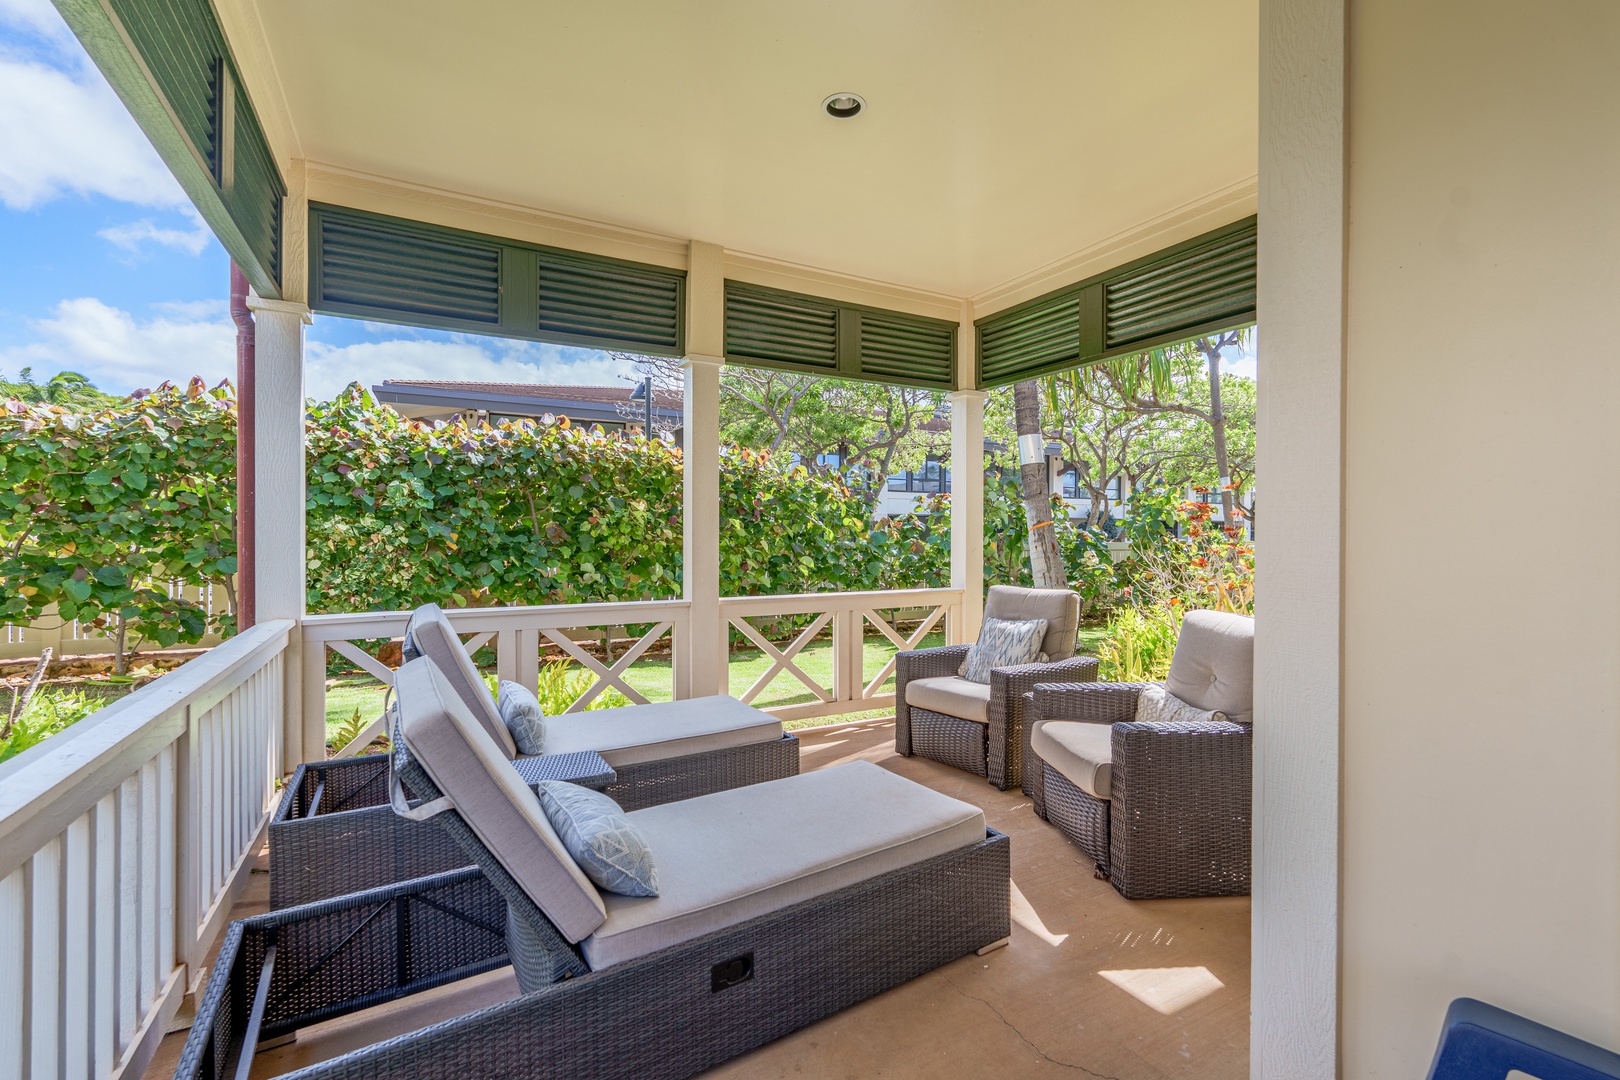 Kapolei Vacation Rentals, Coconut Plantation 1078-1 - The relaxing garden view from the lanai with plush seats, a perfect spot for relax and Gather.